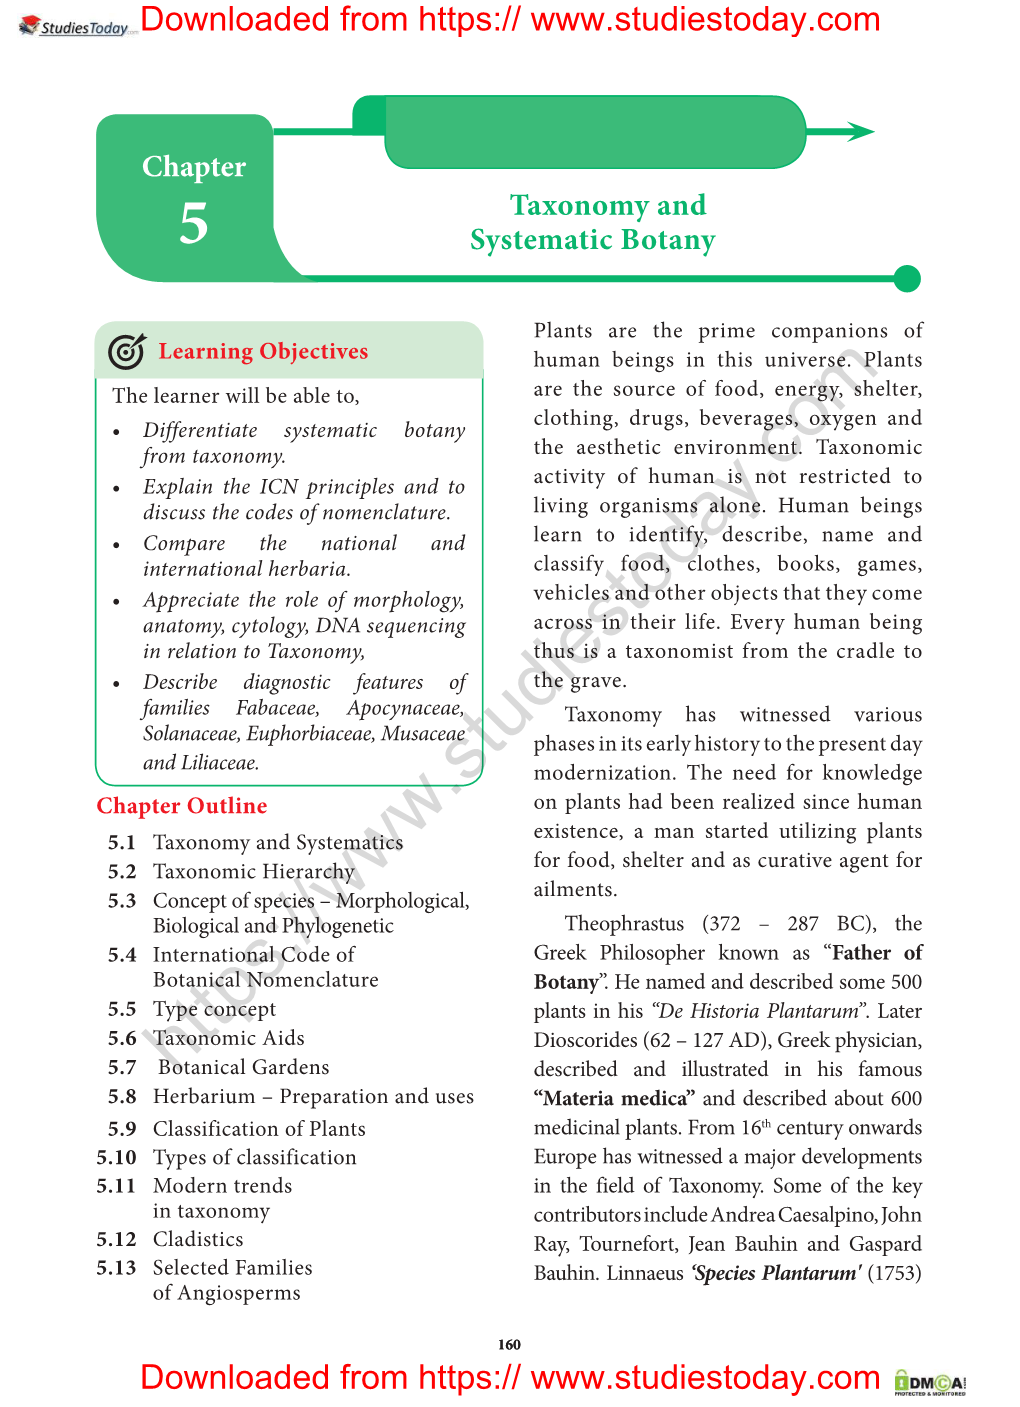 Taxonomy and Systematic Botany Chapter 5